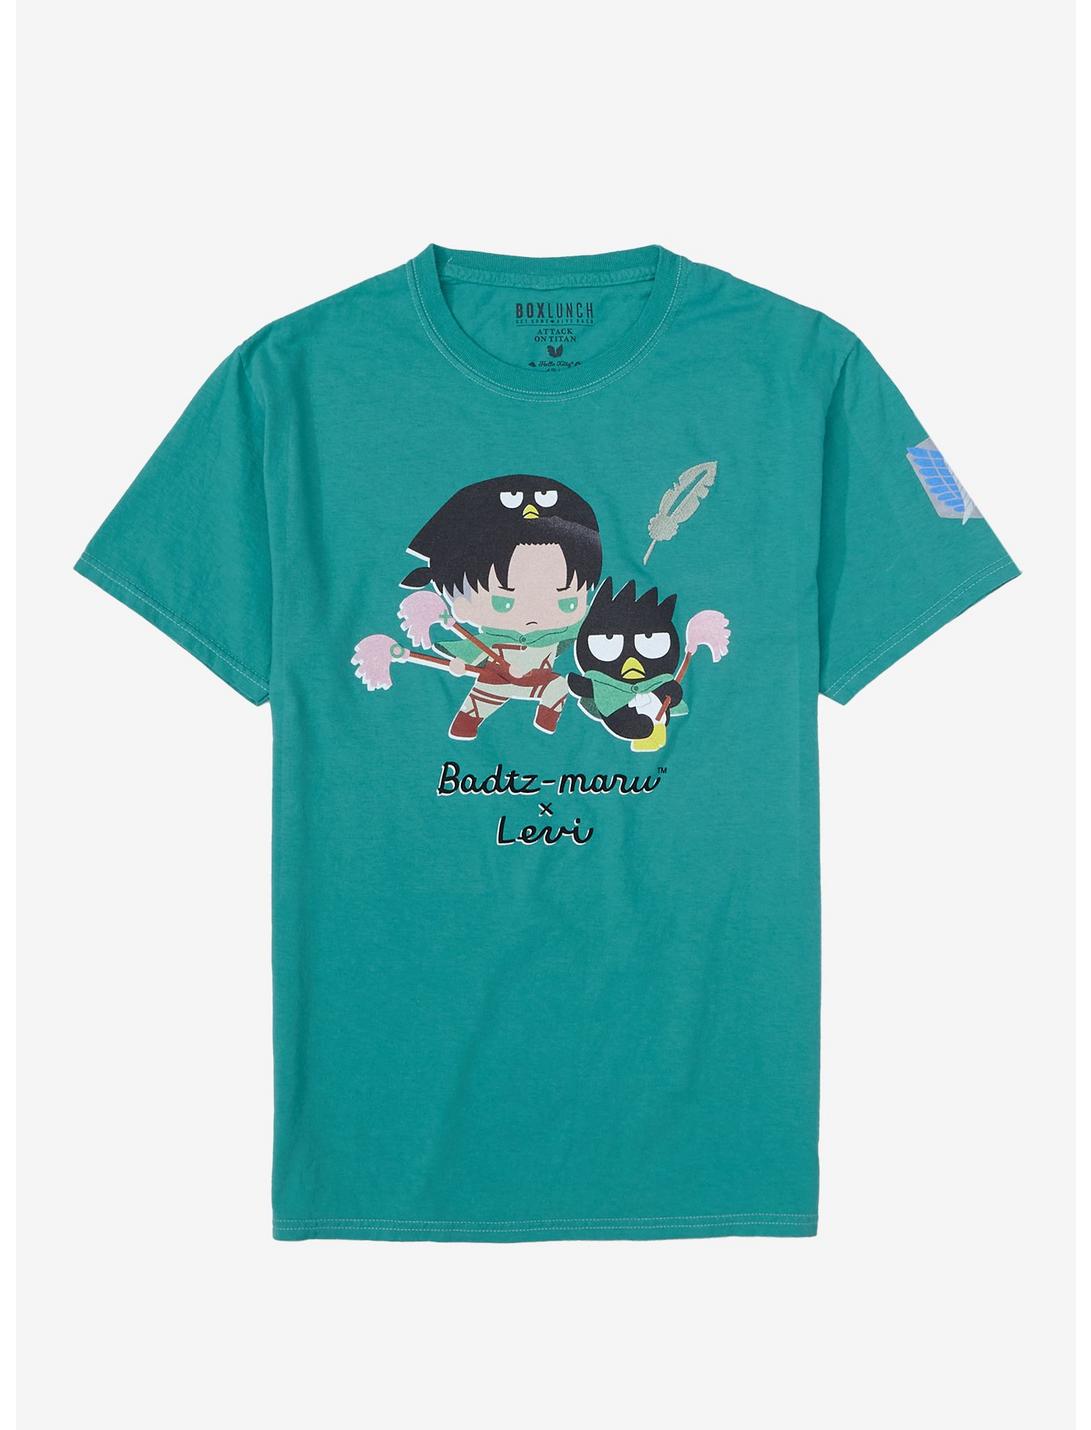 Sanrio Hello Kitty and Friends x Attack on Titan Badtz-Maru & Levi T-Shirt  - BoxLunch Exclusive | BoxLunch